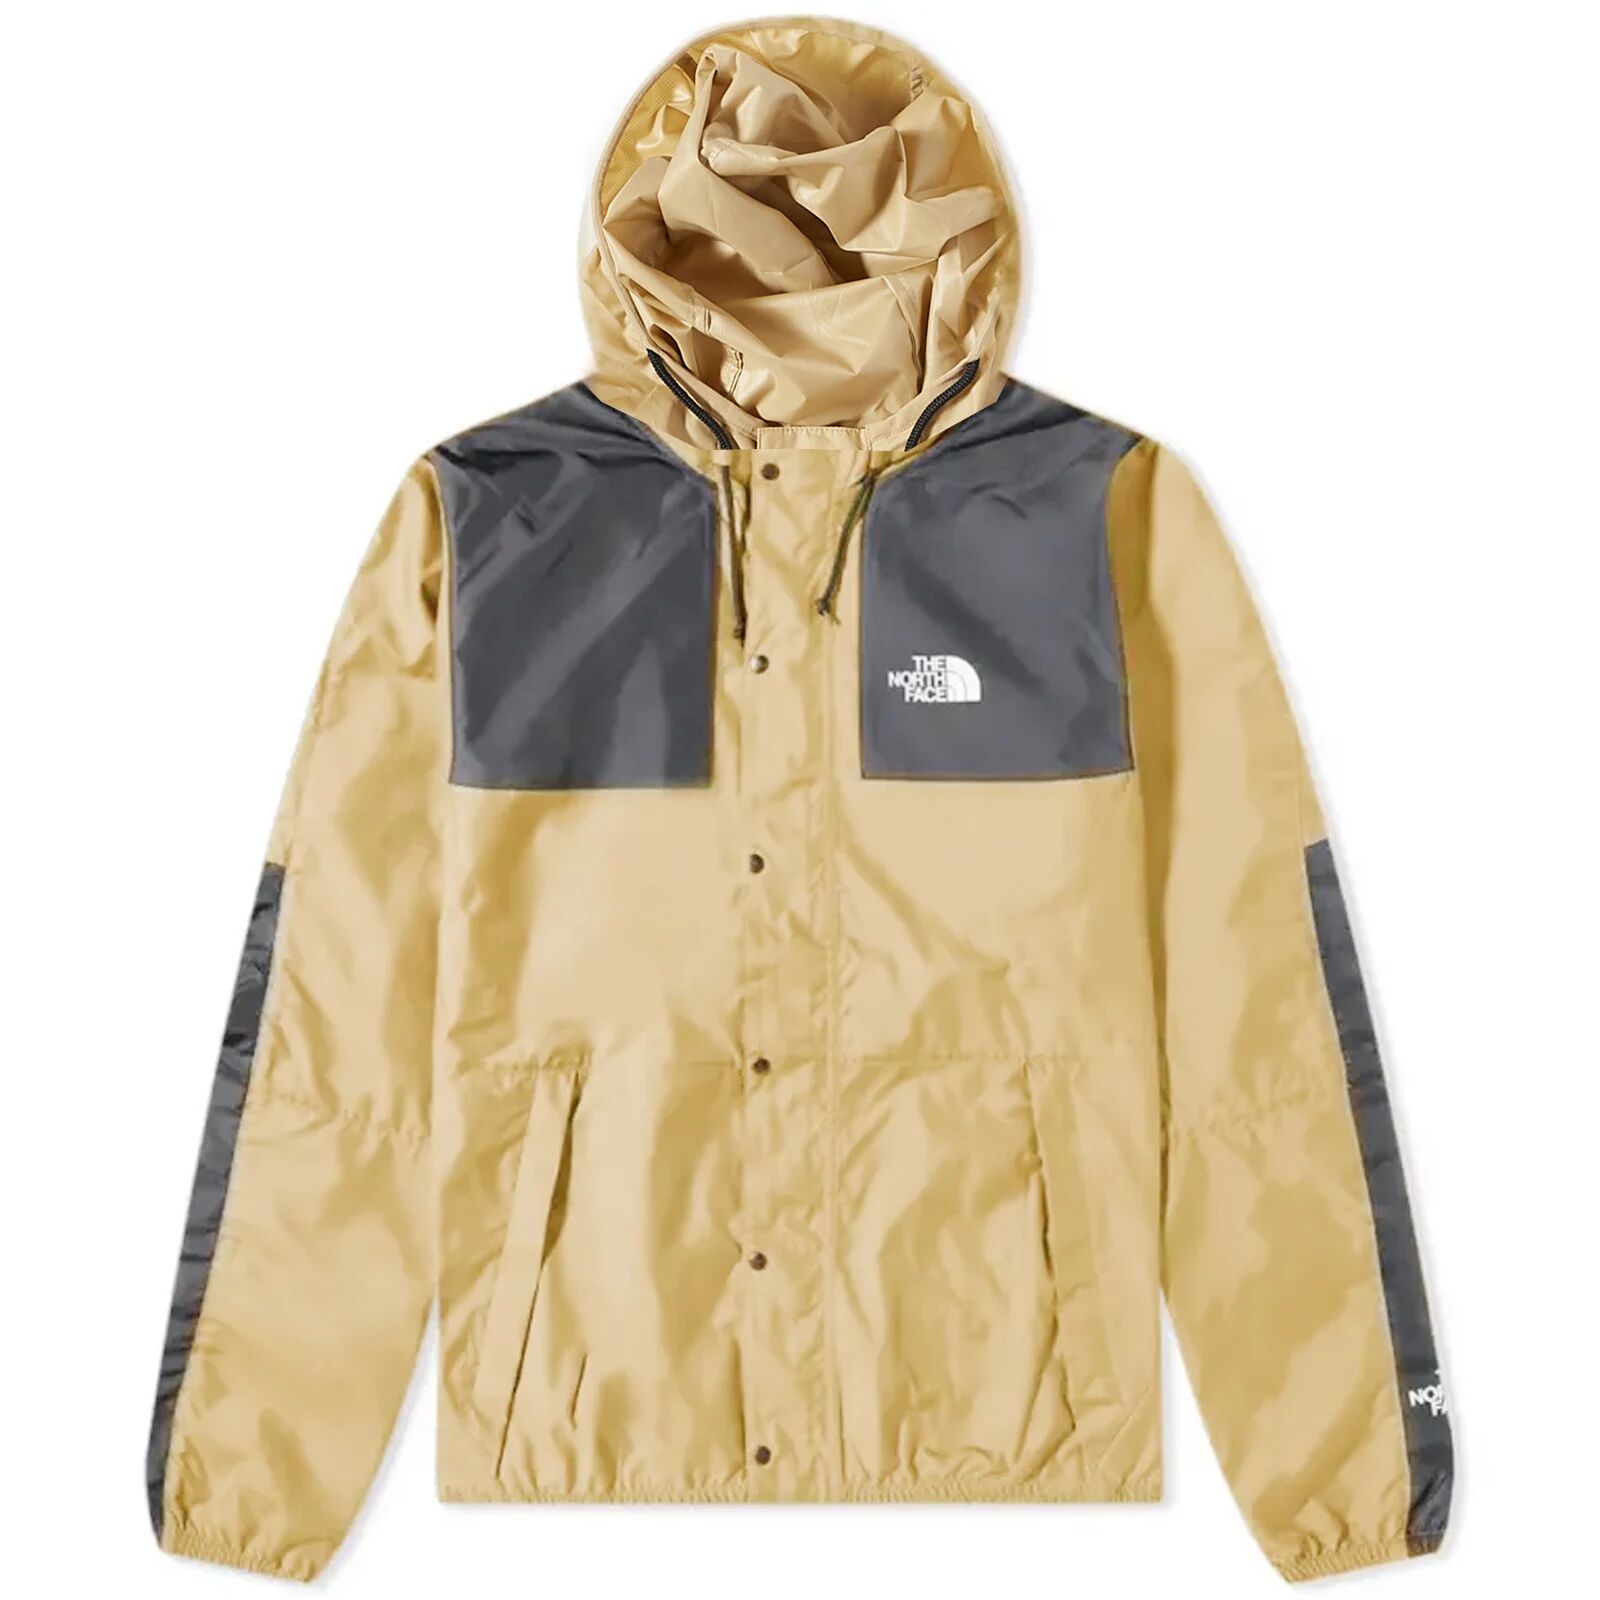 The North Face Men's Seasonal Moutain Jacket in Khaki Stone, Size X-Small